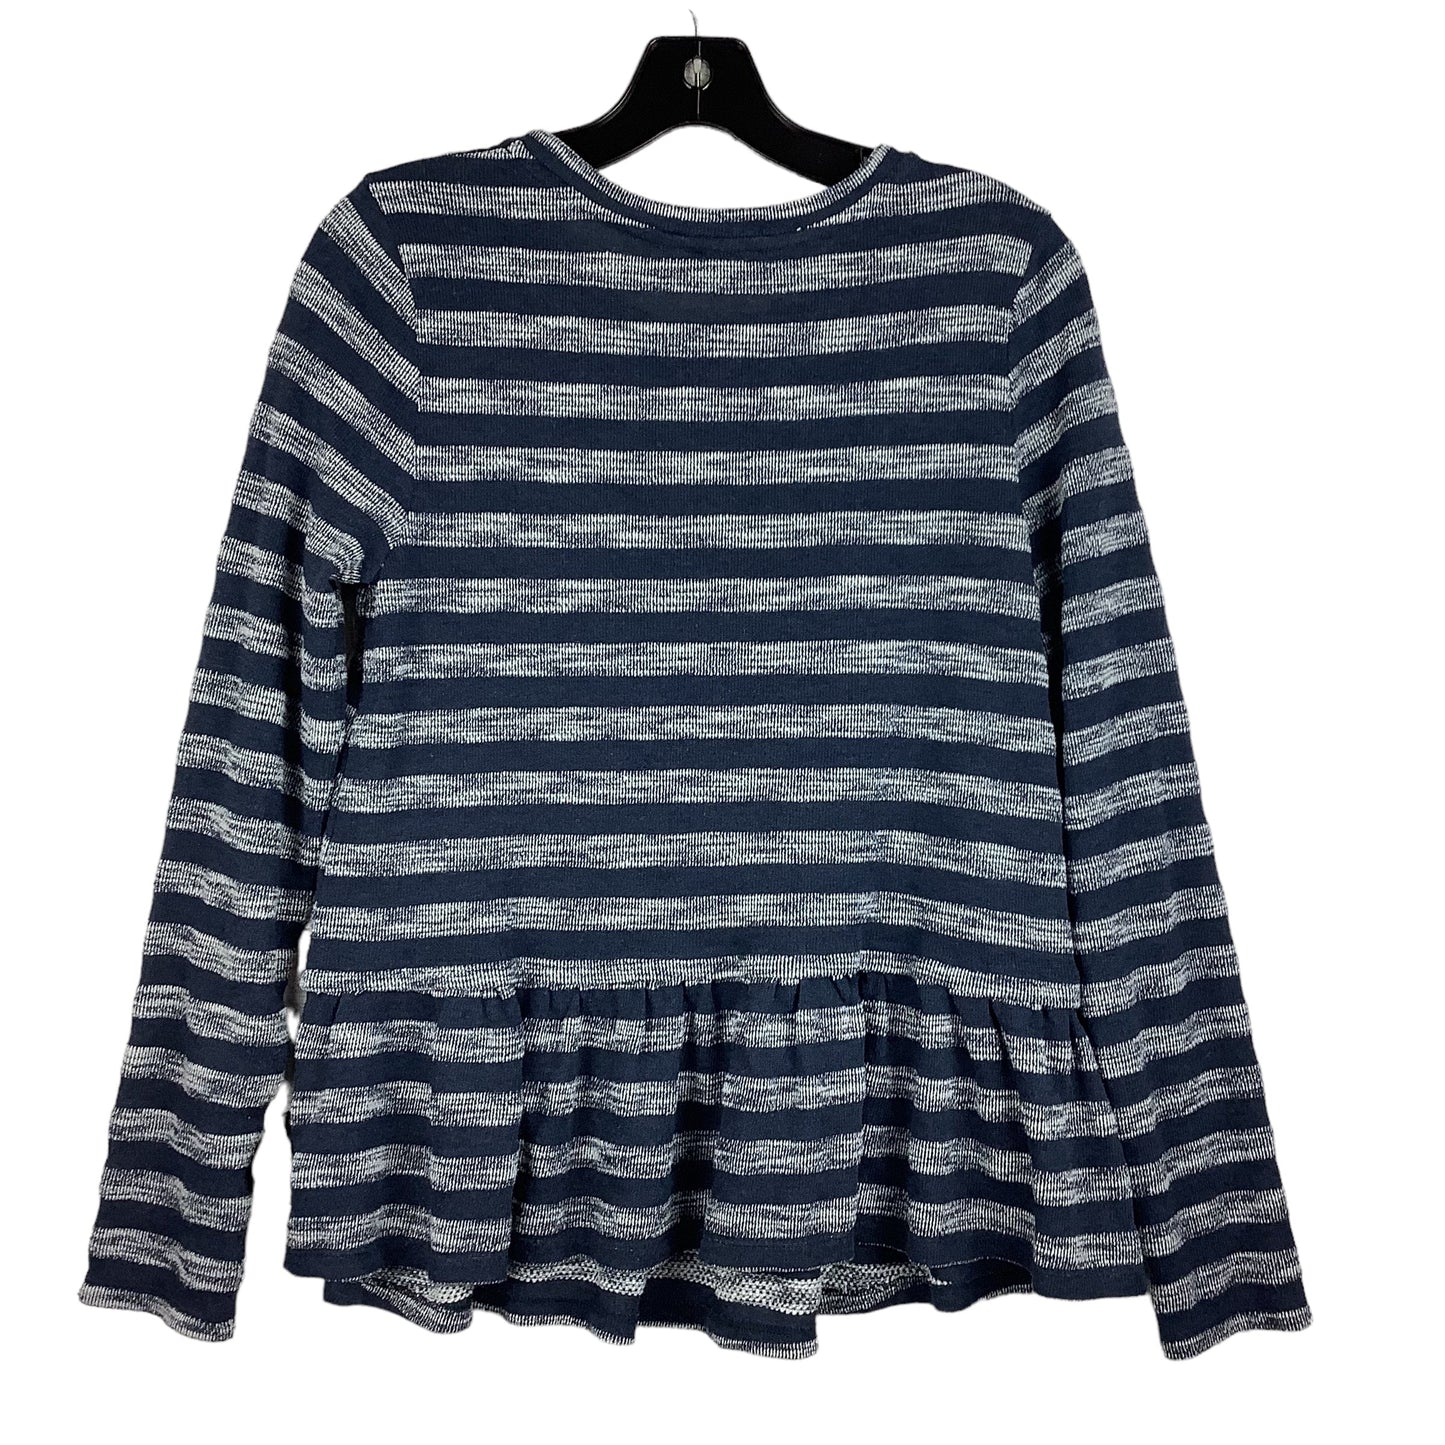 Blue Top Long Sleeve Anthropologie, Size S